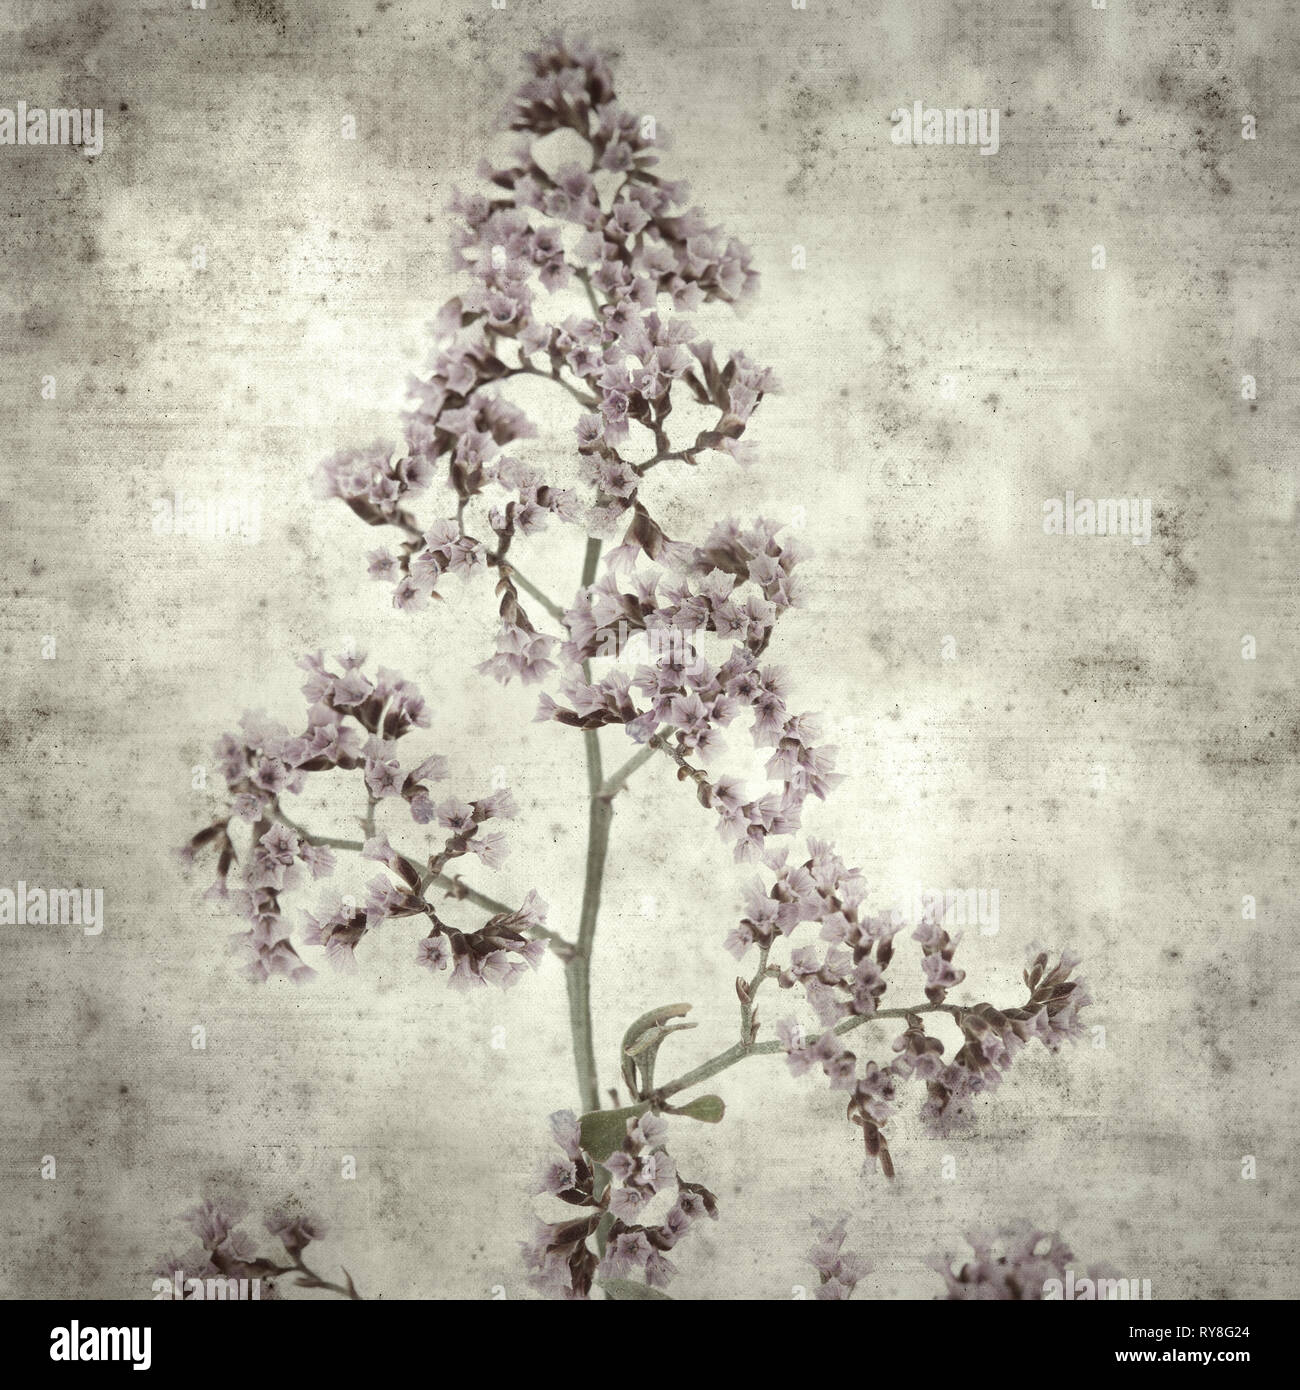 textured stylish old paper background, square, with small pale lilac flowers of Limonium Stock Photo